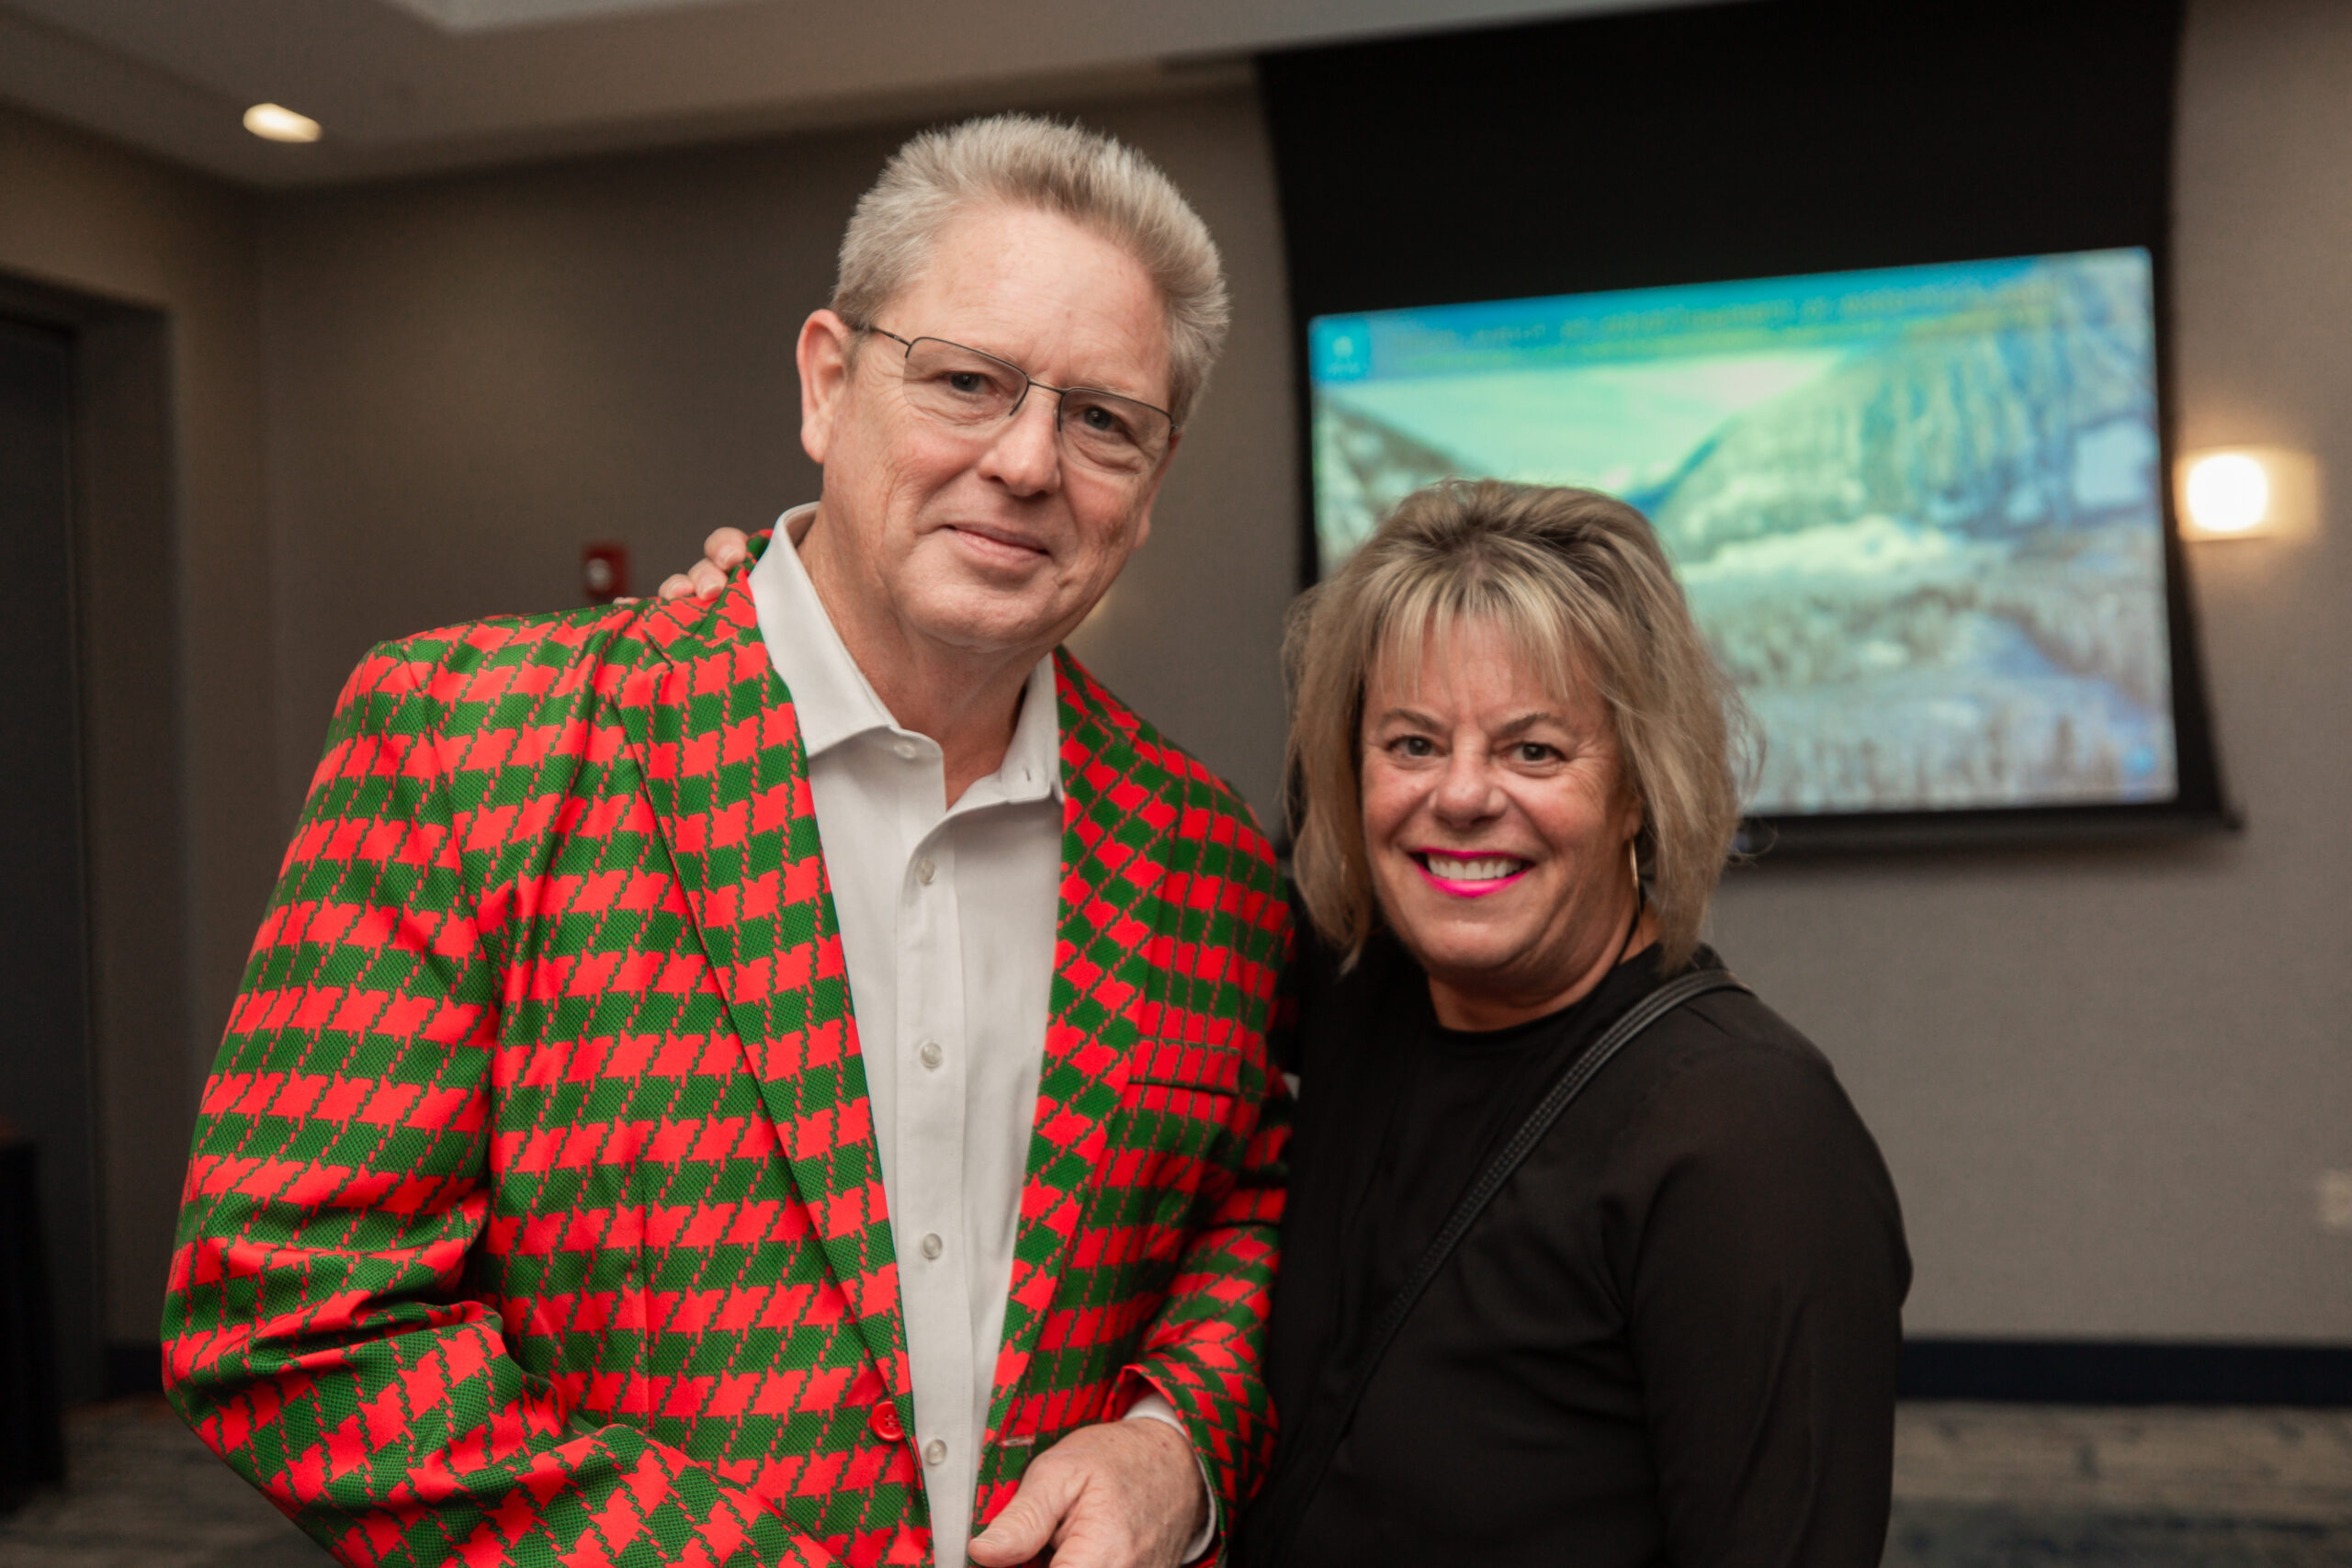 Realtors Jeff Wiltcher and Terri Hayman looking dashing at the office Christmas party